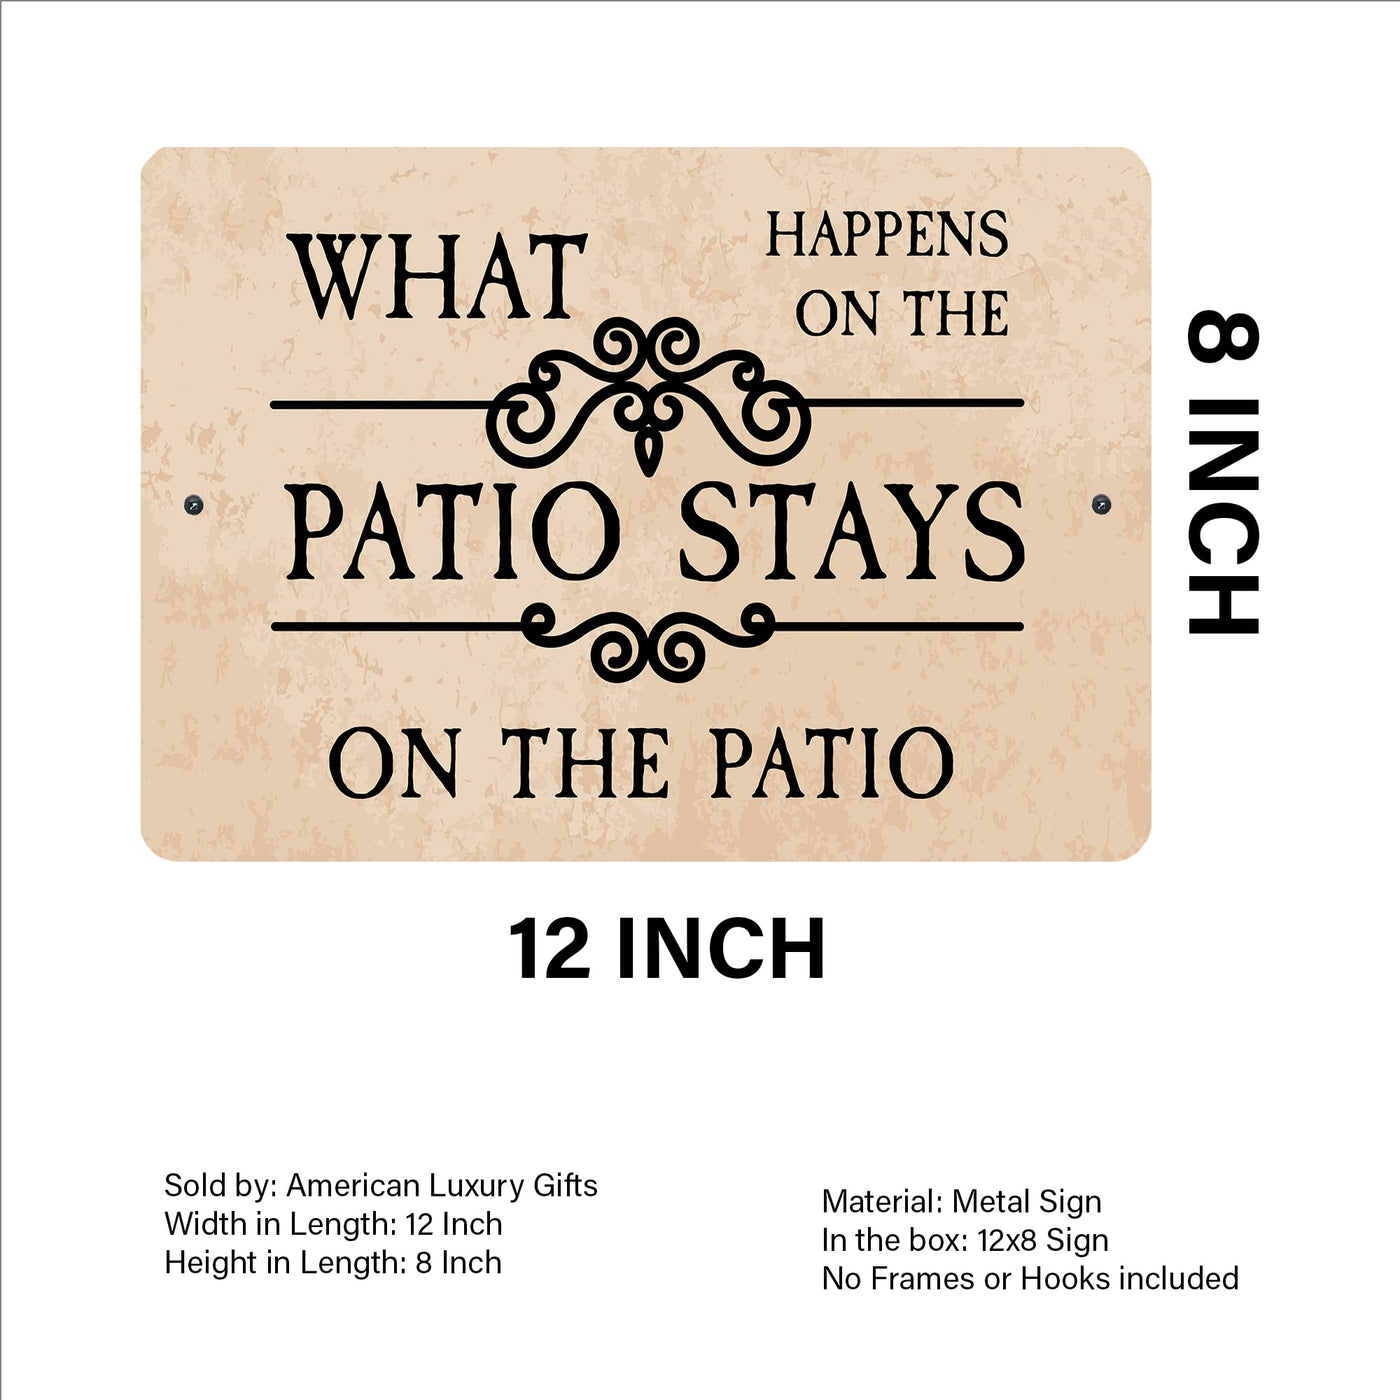 What Happens On Patio, Stays on Patio Metal Signs Vintage Wall Art -12 x 8" Funny Rustic Outdoor Metal Sign for Lake, Porch, Deck - Tin Sign Decor for Home-Cabin-Lodge Accessories & Gifts!